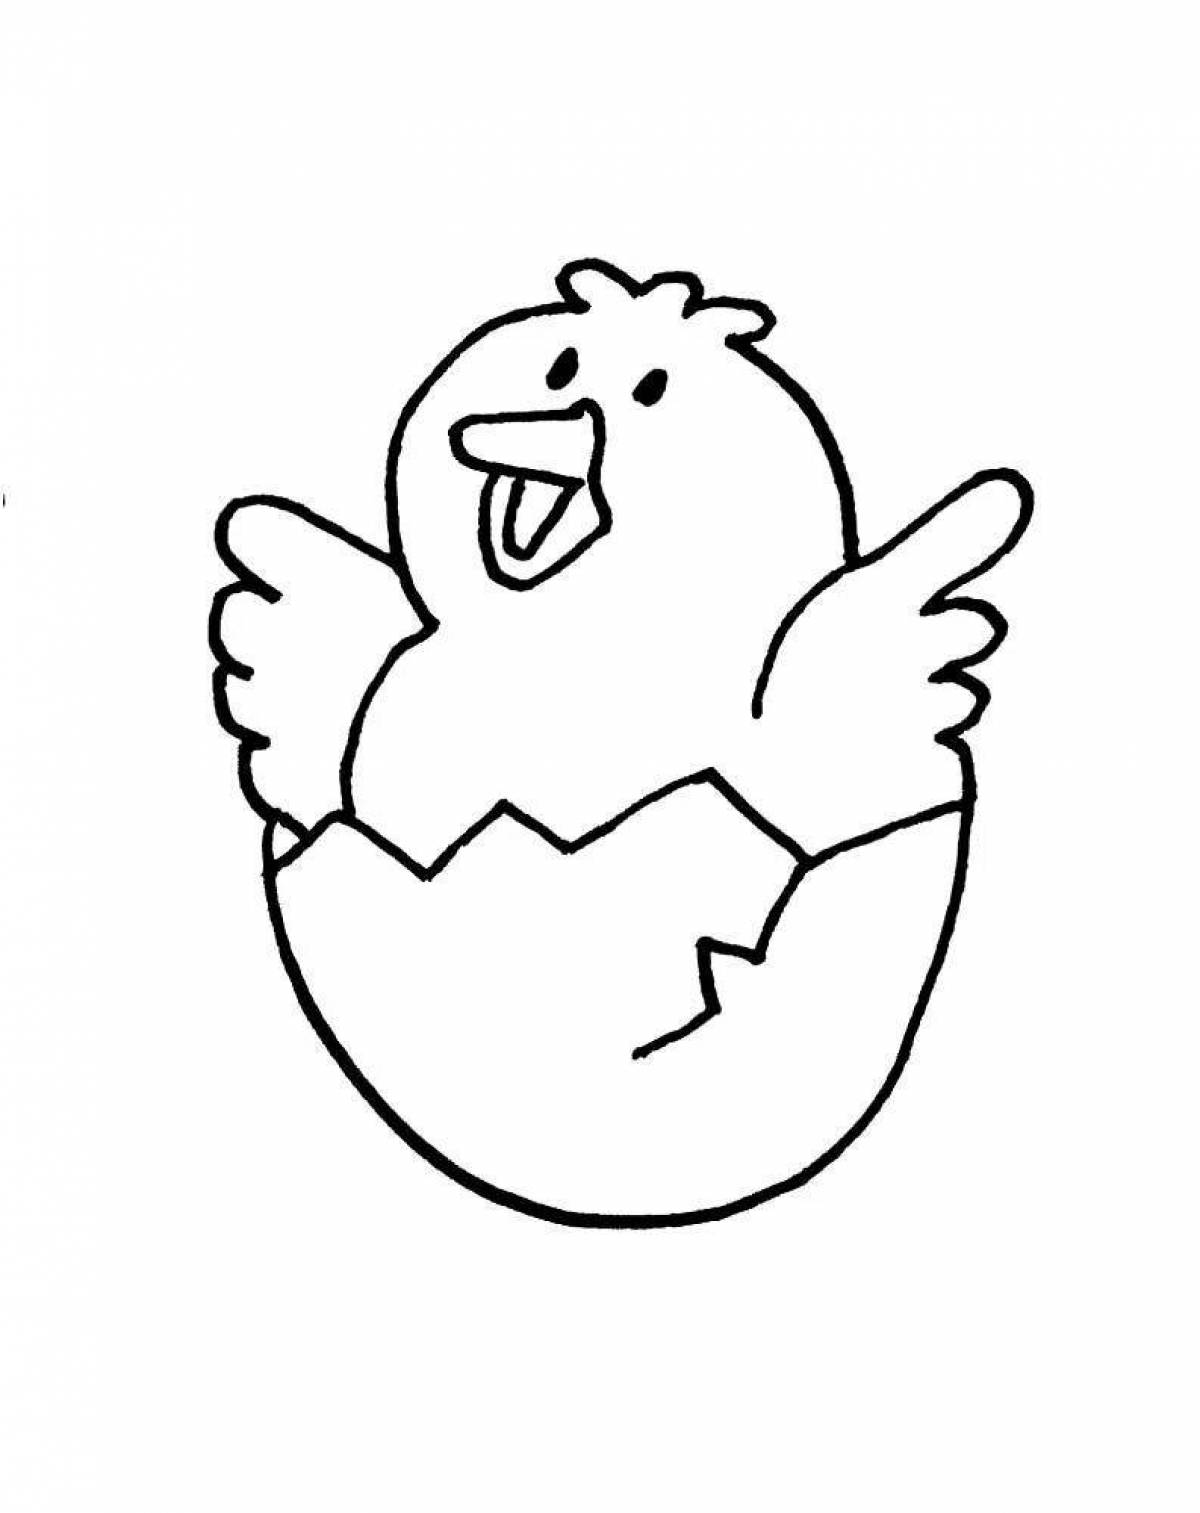 Joyful chicken egg coloring page